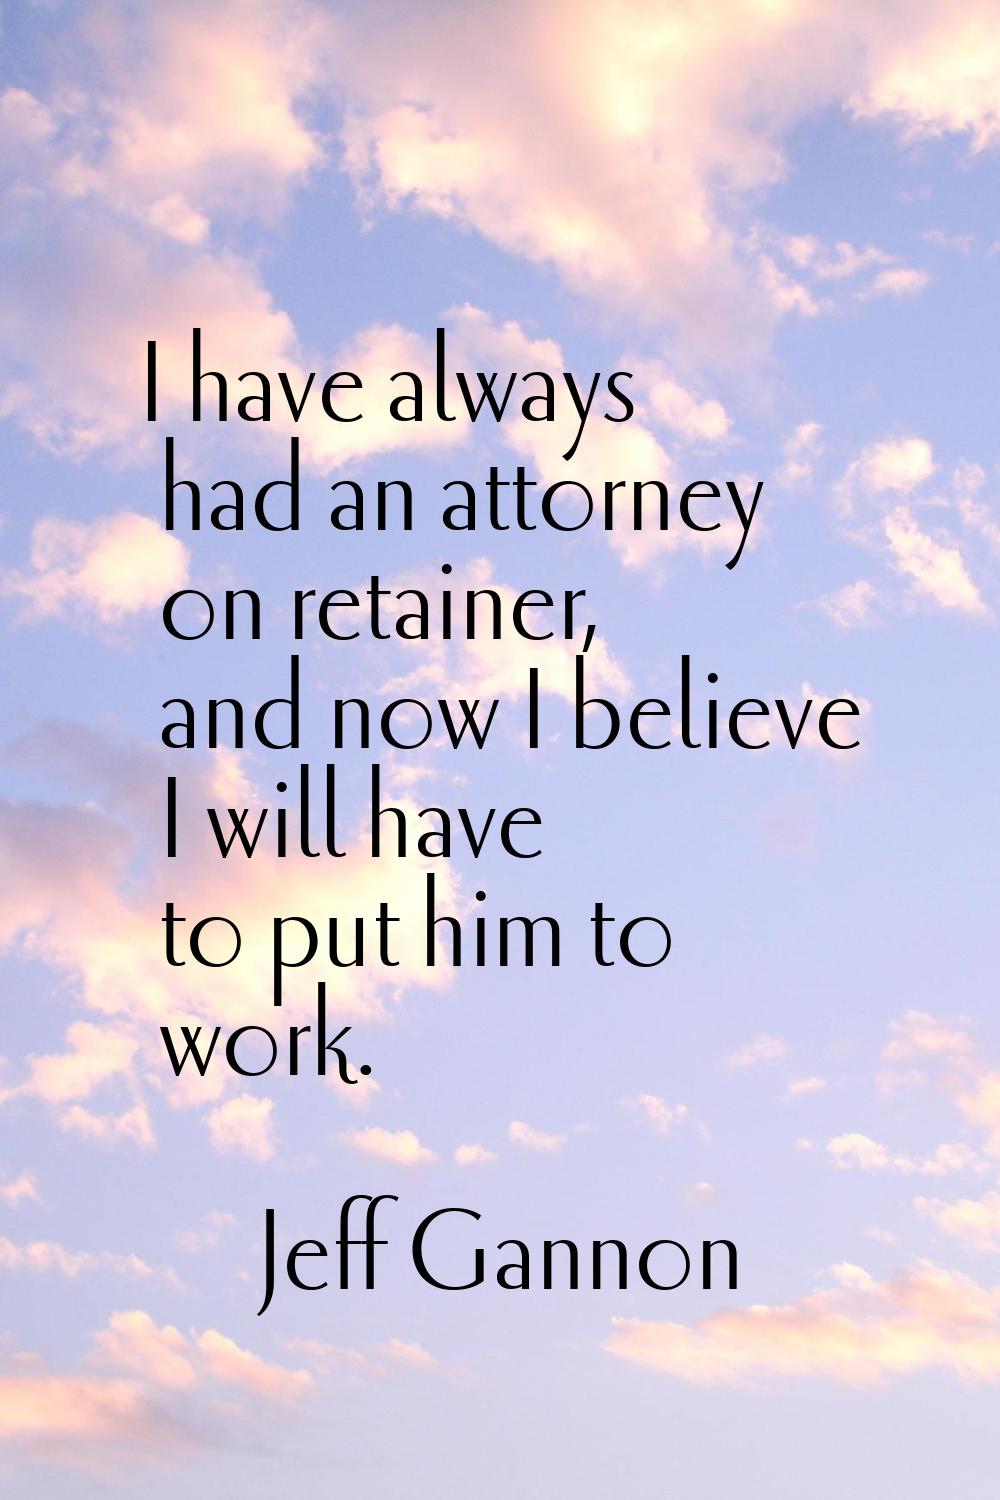 I have always had an attorney on retainer, and now I believe I will have to put him to work.